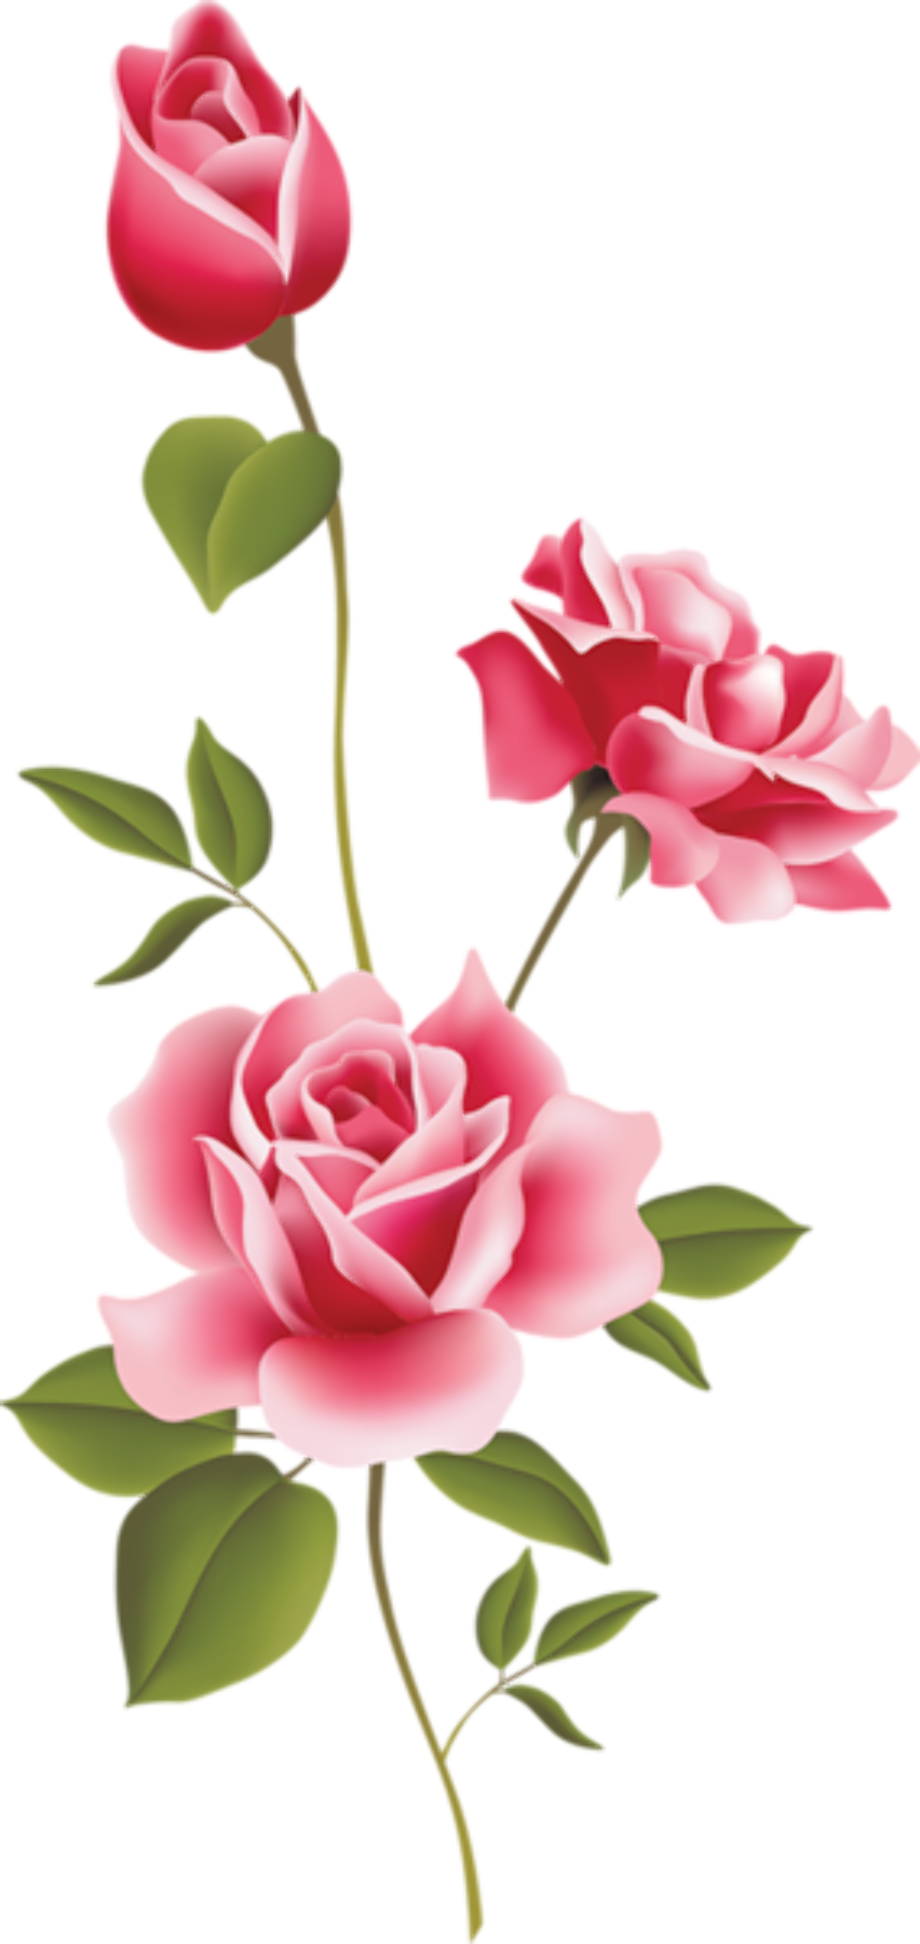 roses clipart pink